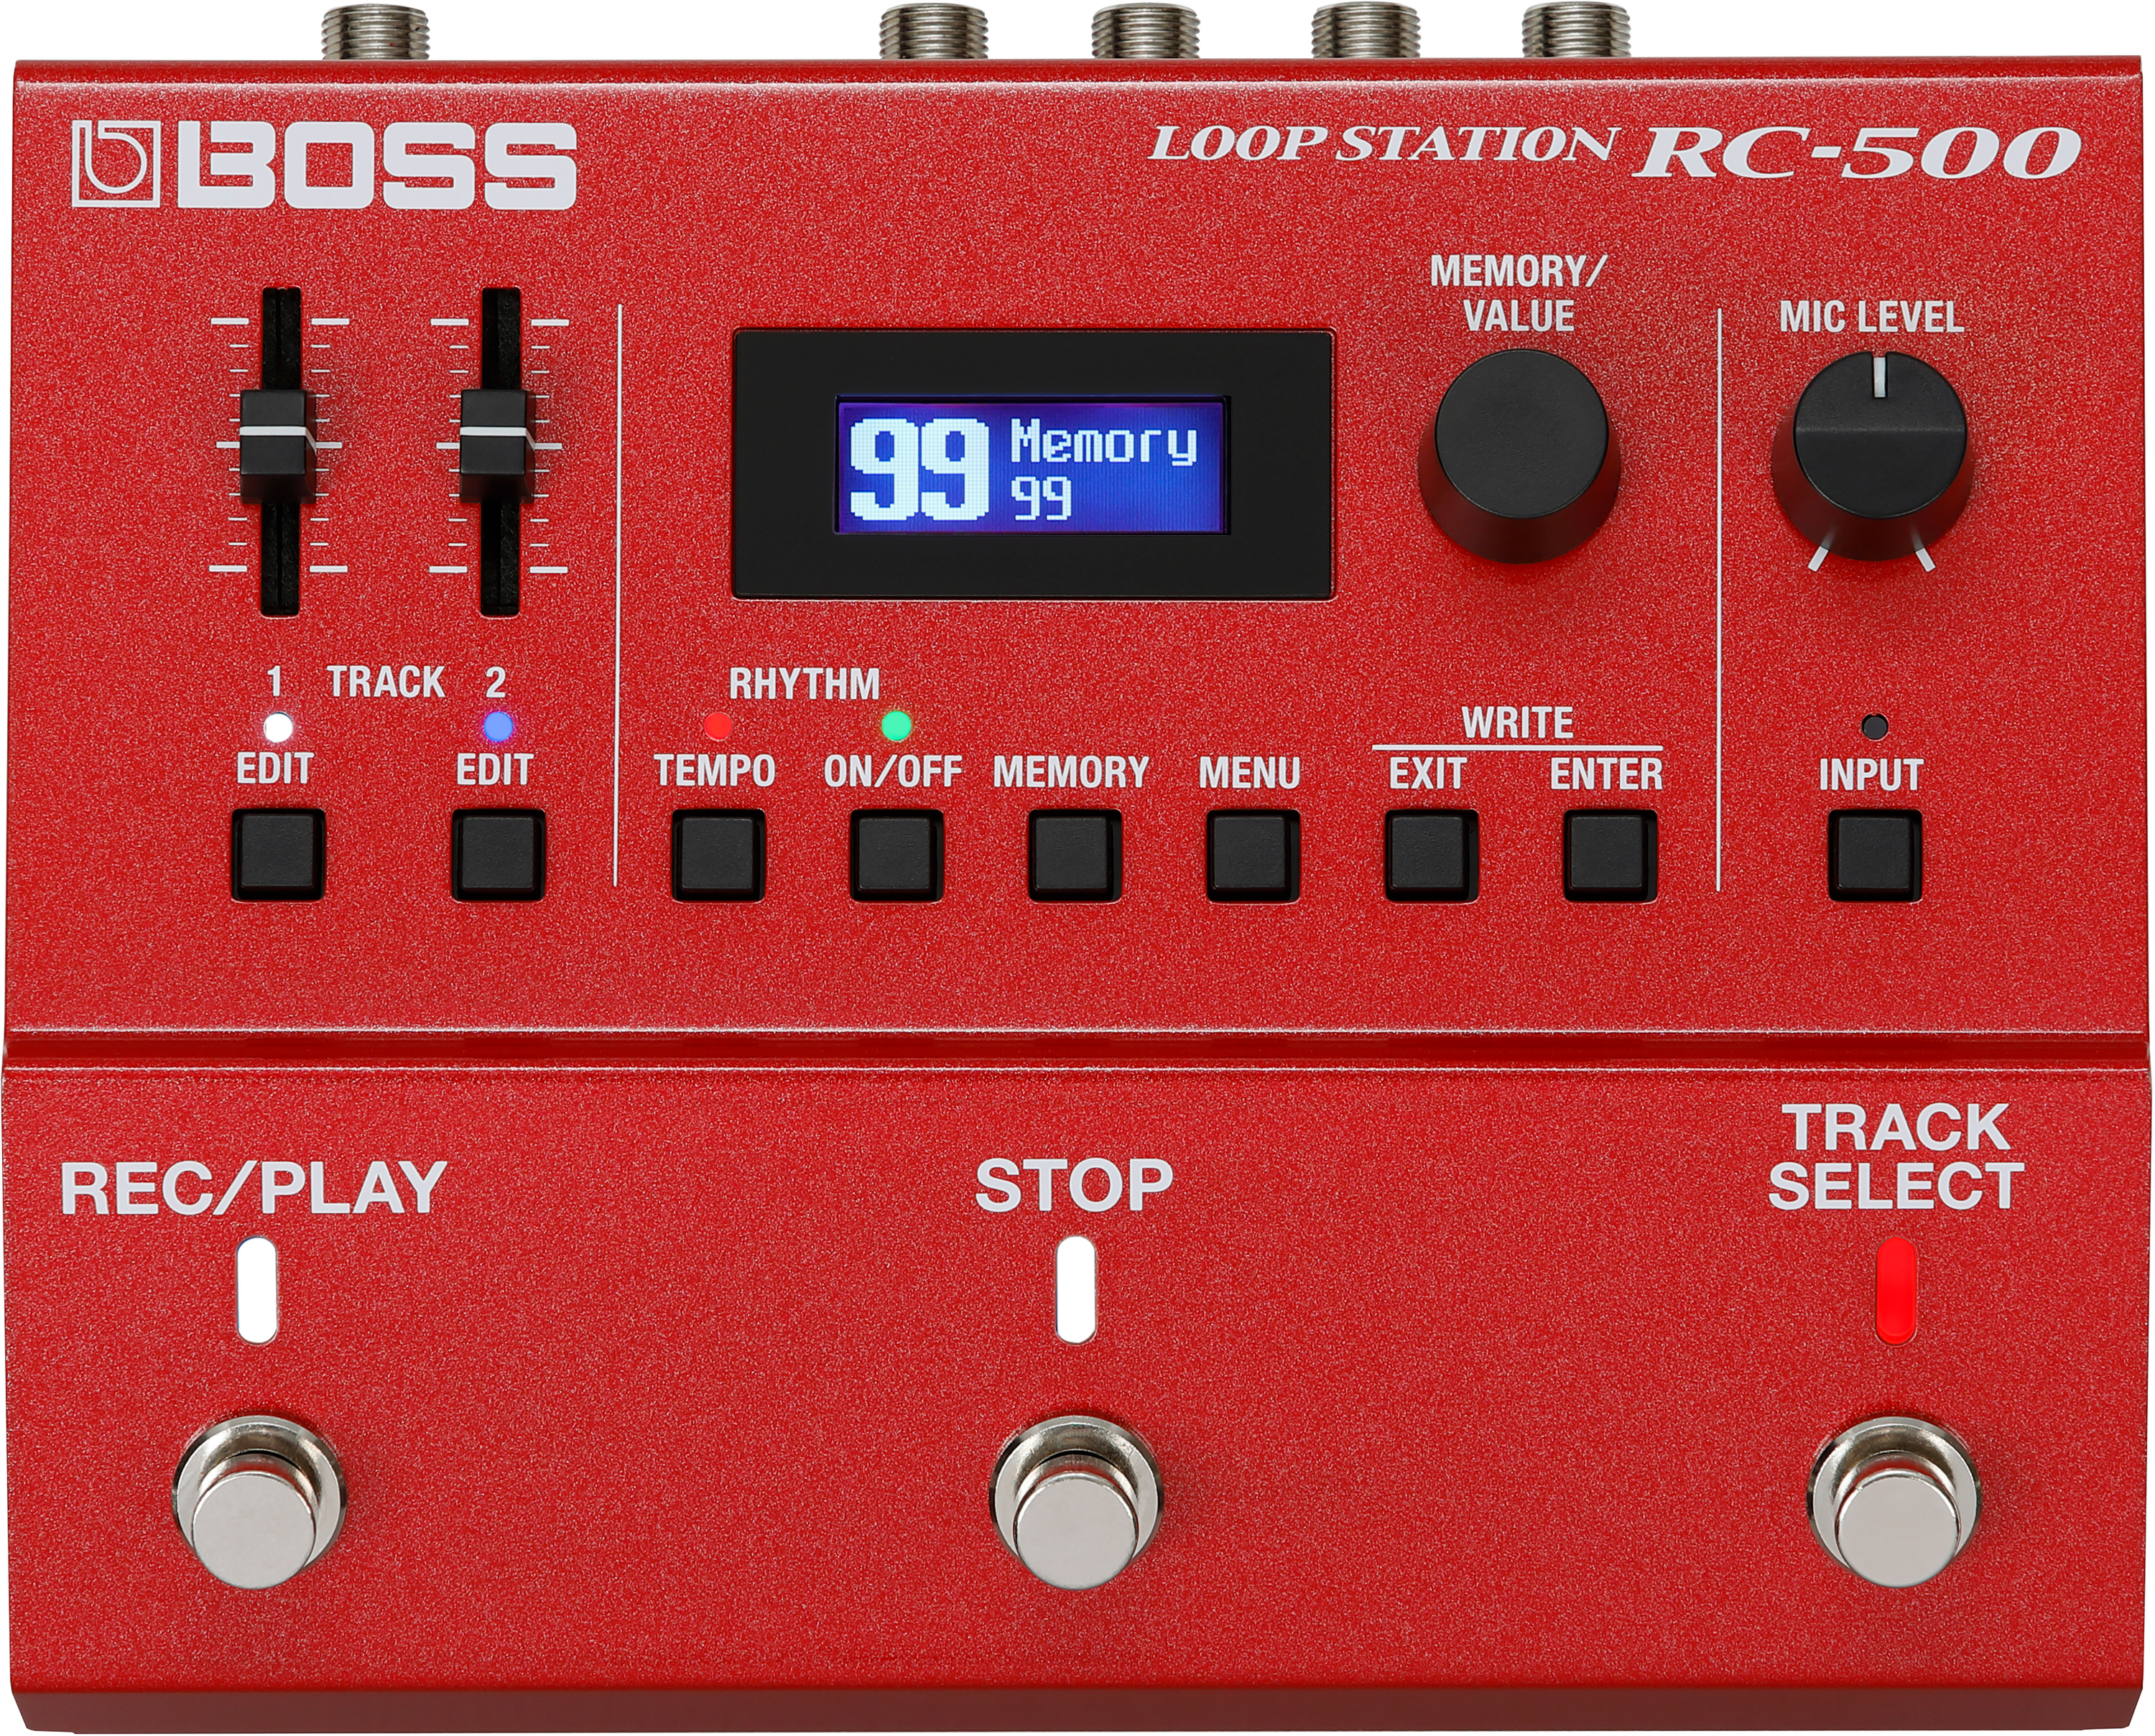 Pedal　Recorder　Sweetwater　Compact　Loop　Station　RC-500　Boss　Phrase